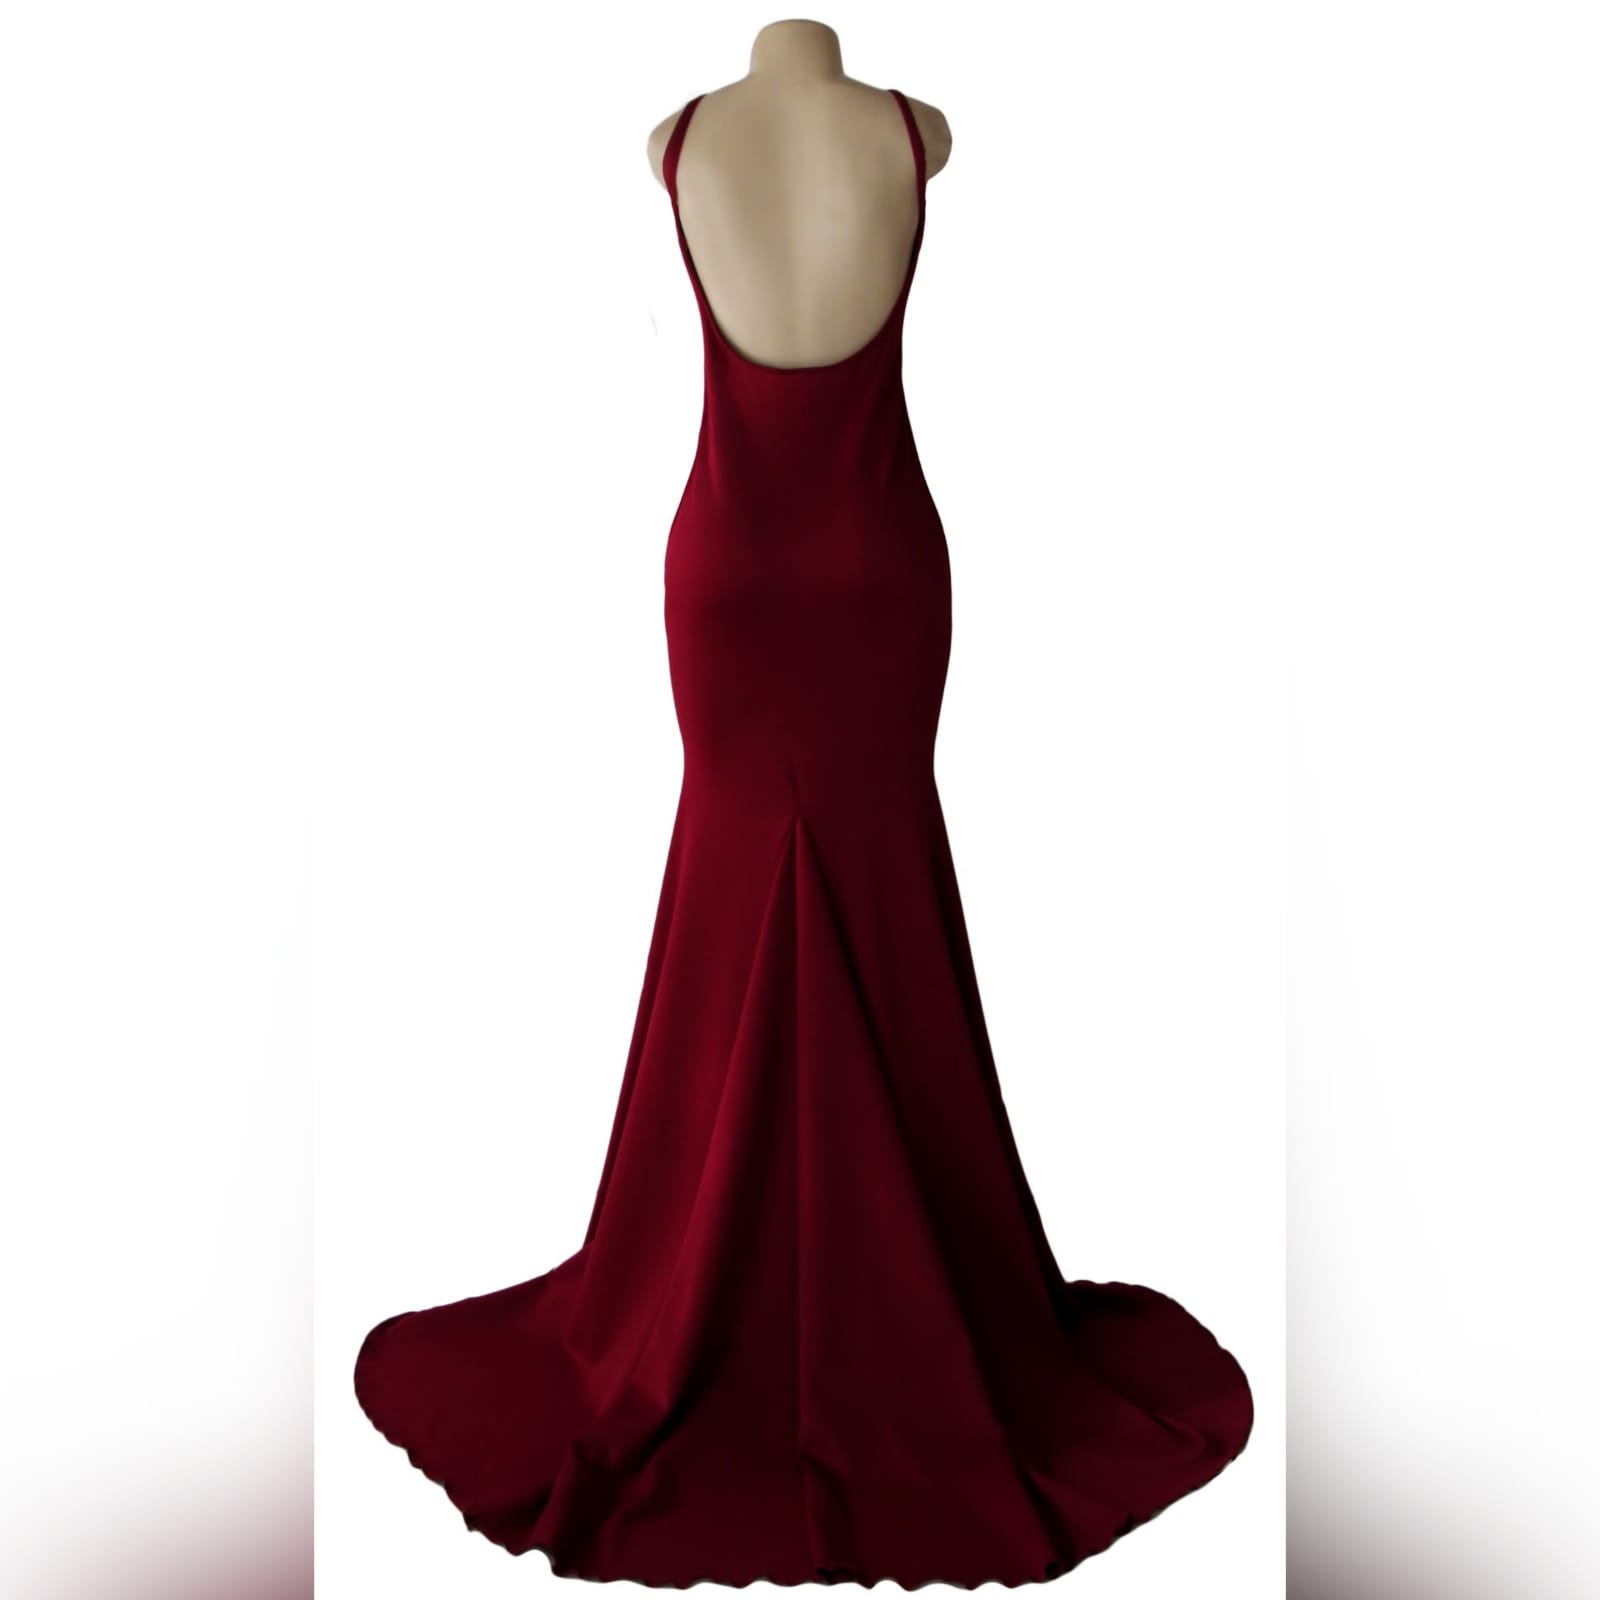 Maroon simple soft mermaid prom dress 5 maroon simple soft mermaid prom dress with a jewel neckline and a low rounded open back, thin shoulder straps and a train.